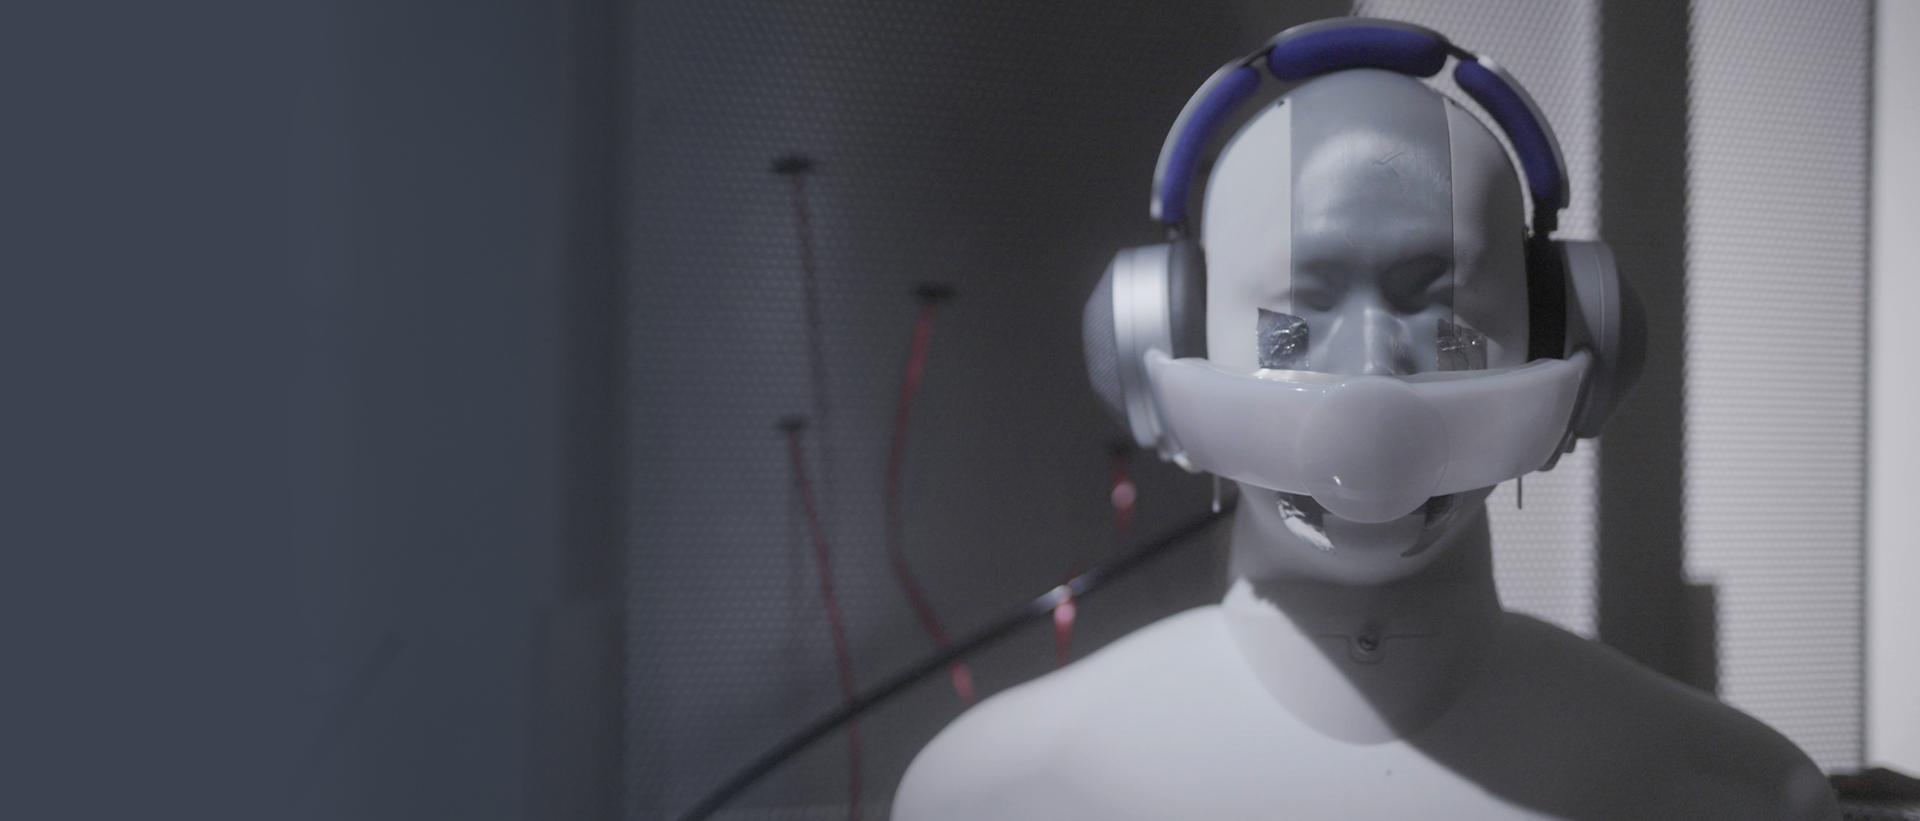 Manikin wearing prototype headphones, with visor across nose and mouth